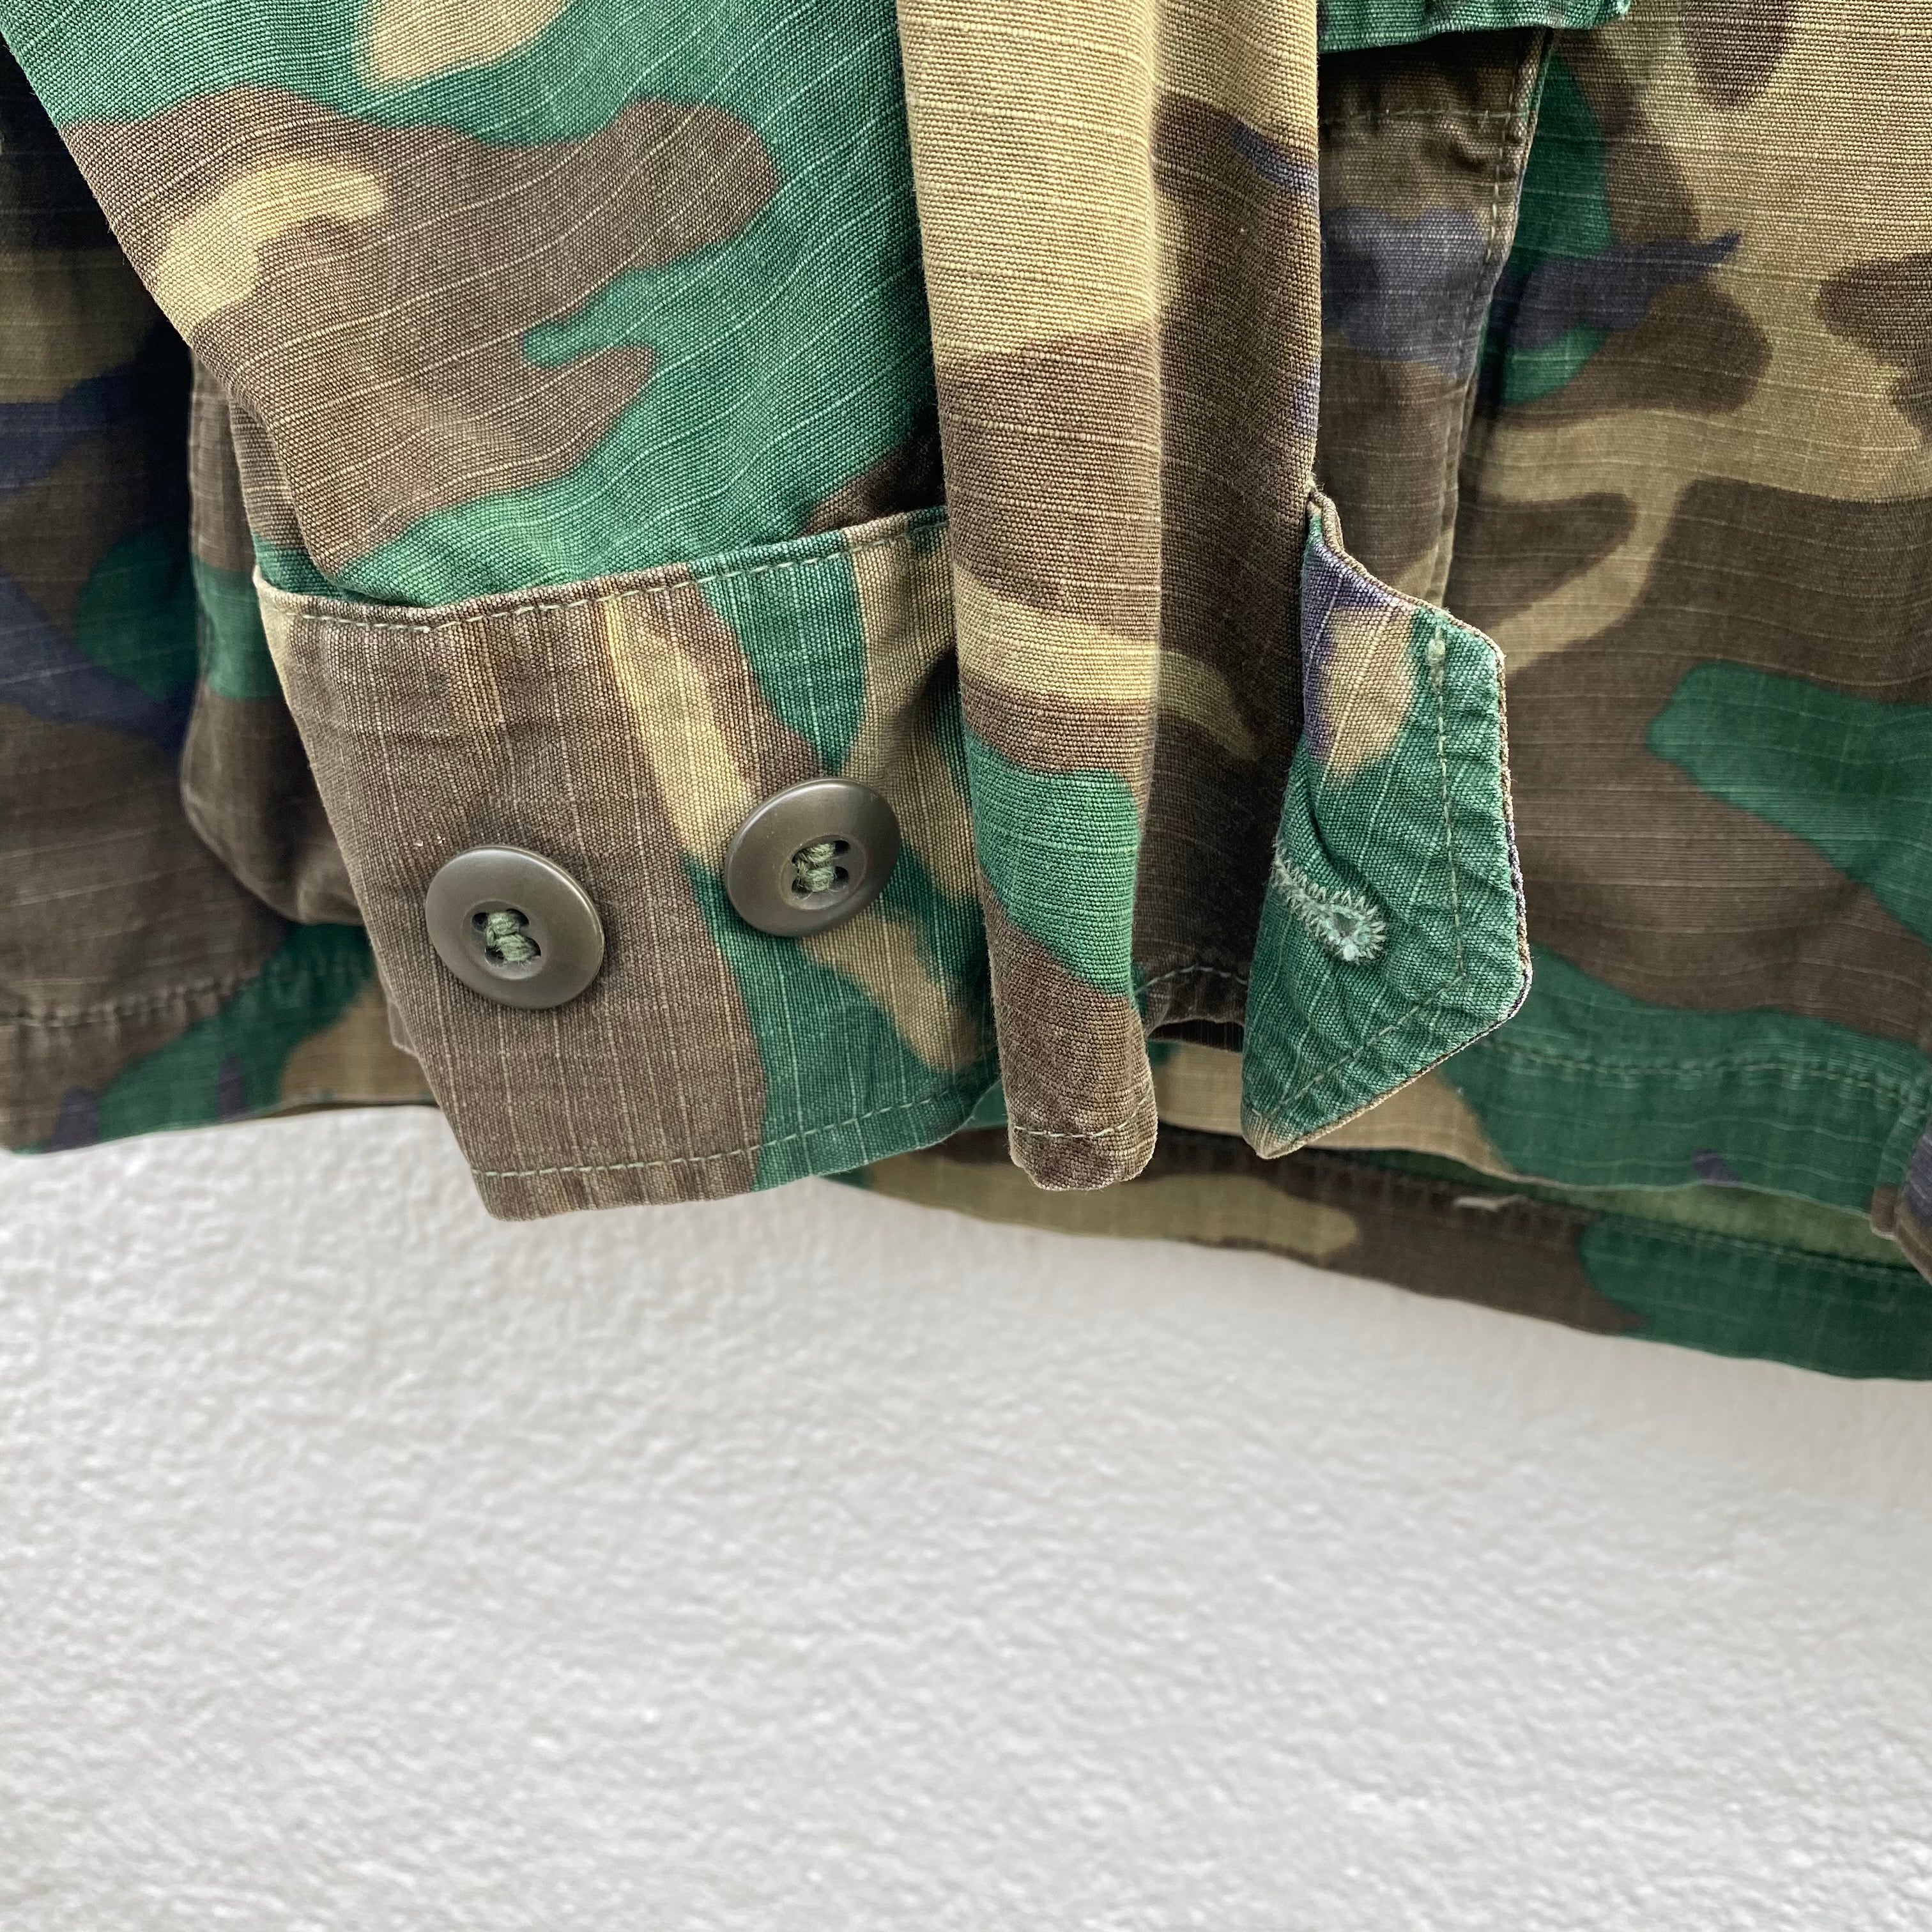 [ ONLY ONE ! ] US ARMED FORCES '70 JUNGLE FATIGUE SHIRT / Mr.Clean Select